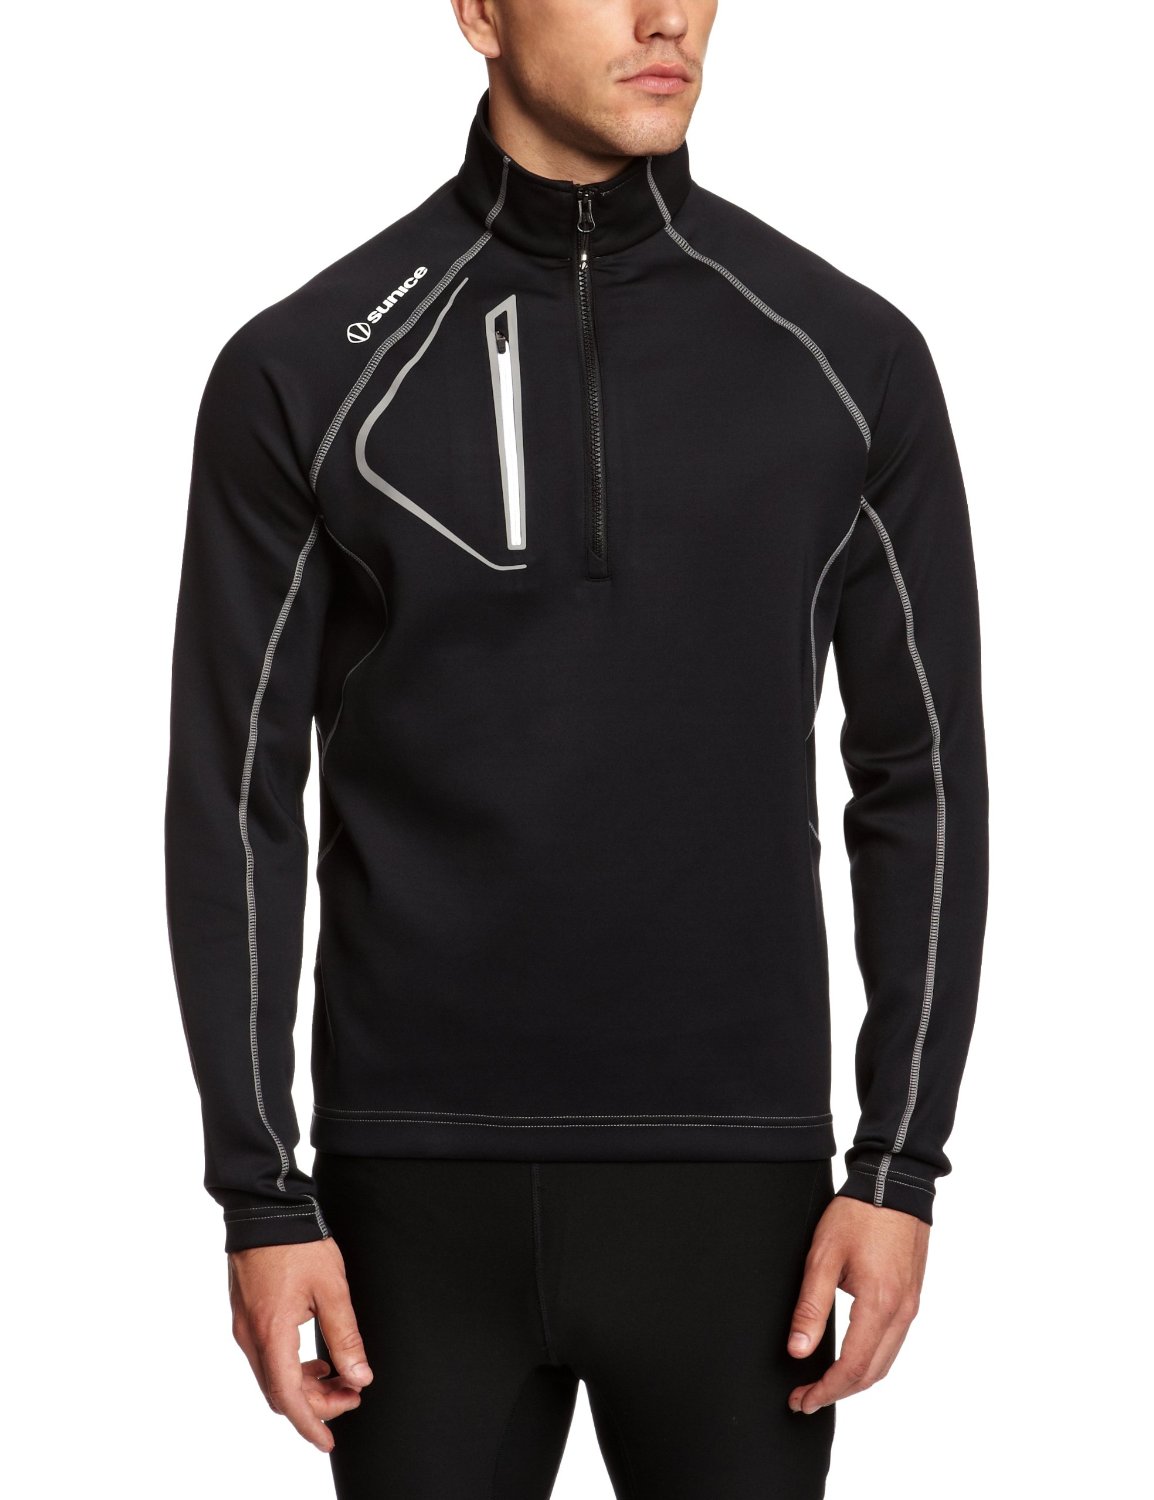 Sunice Allendale Thermal Layer Golf Jackets